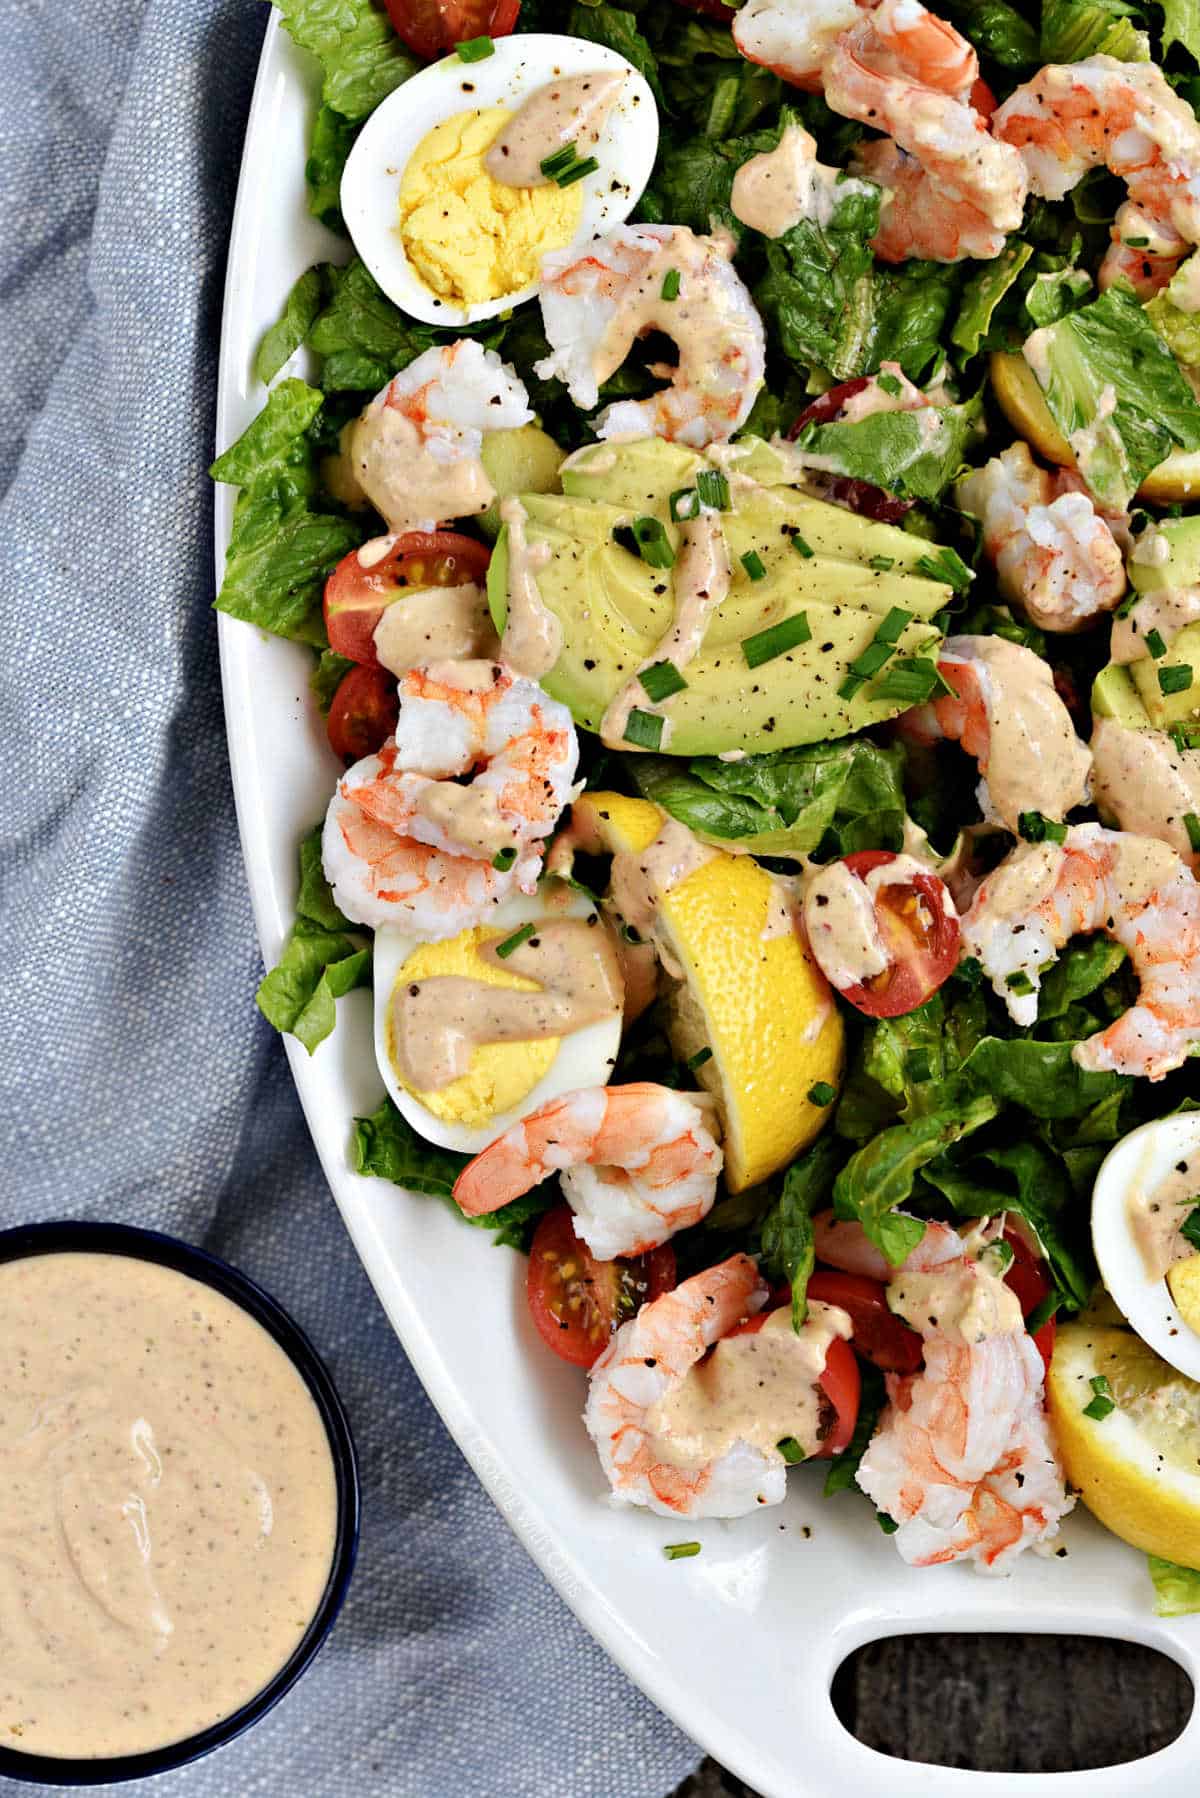 Thousand island dressing in a small bowl and drizzled over a shrimp salad.